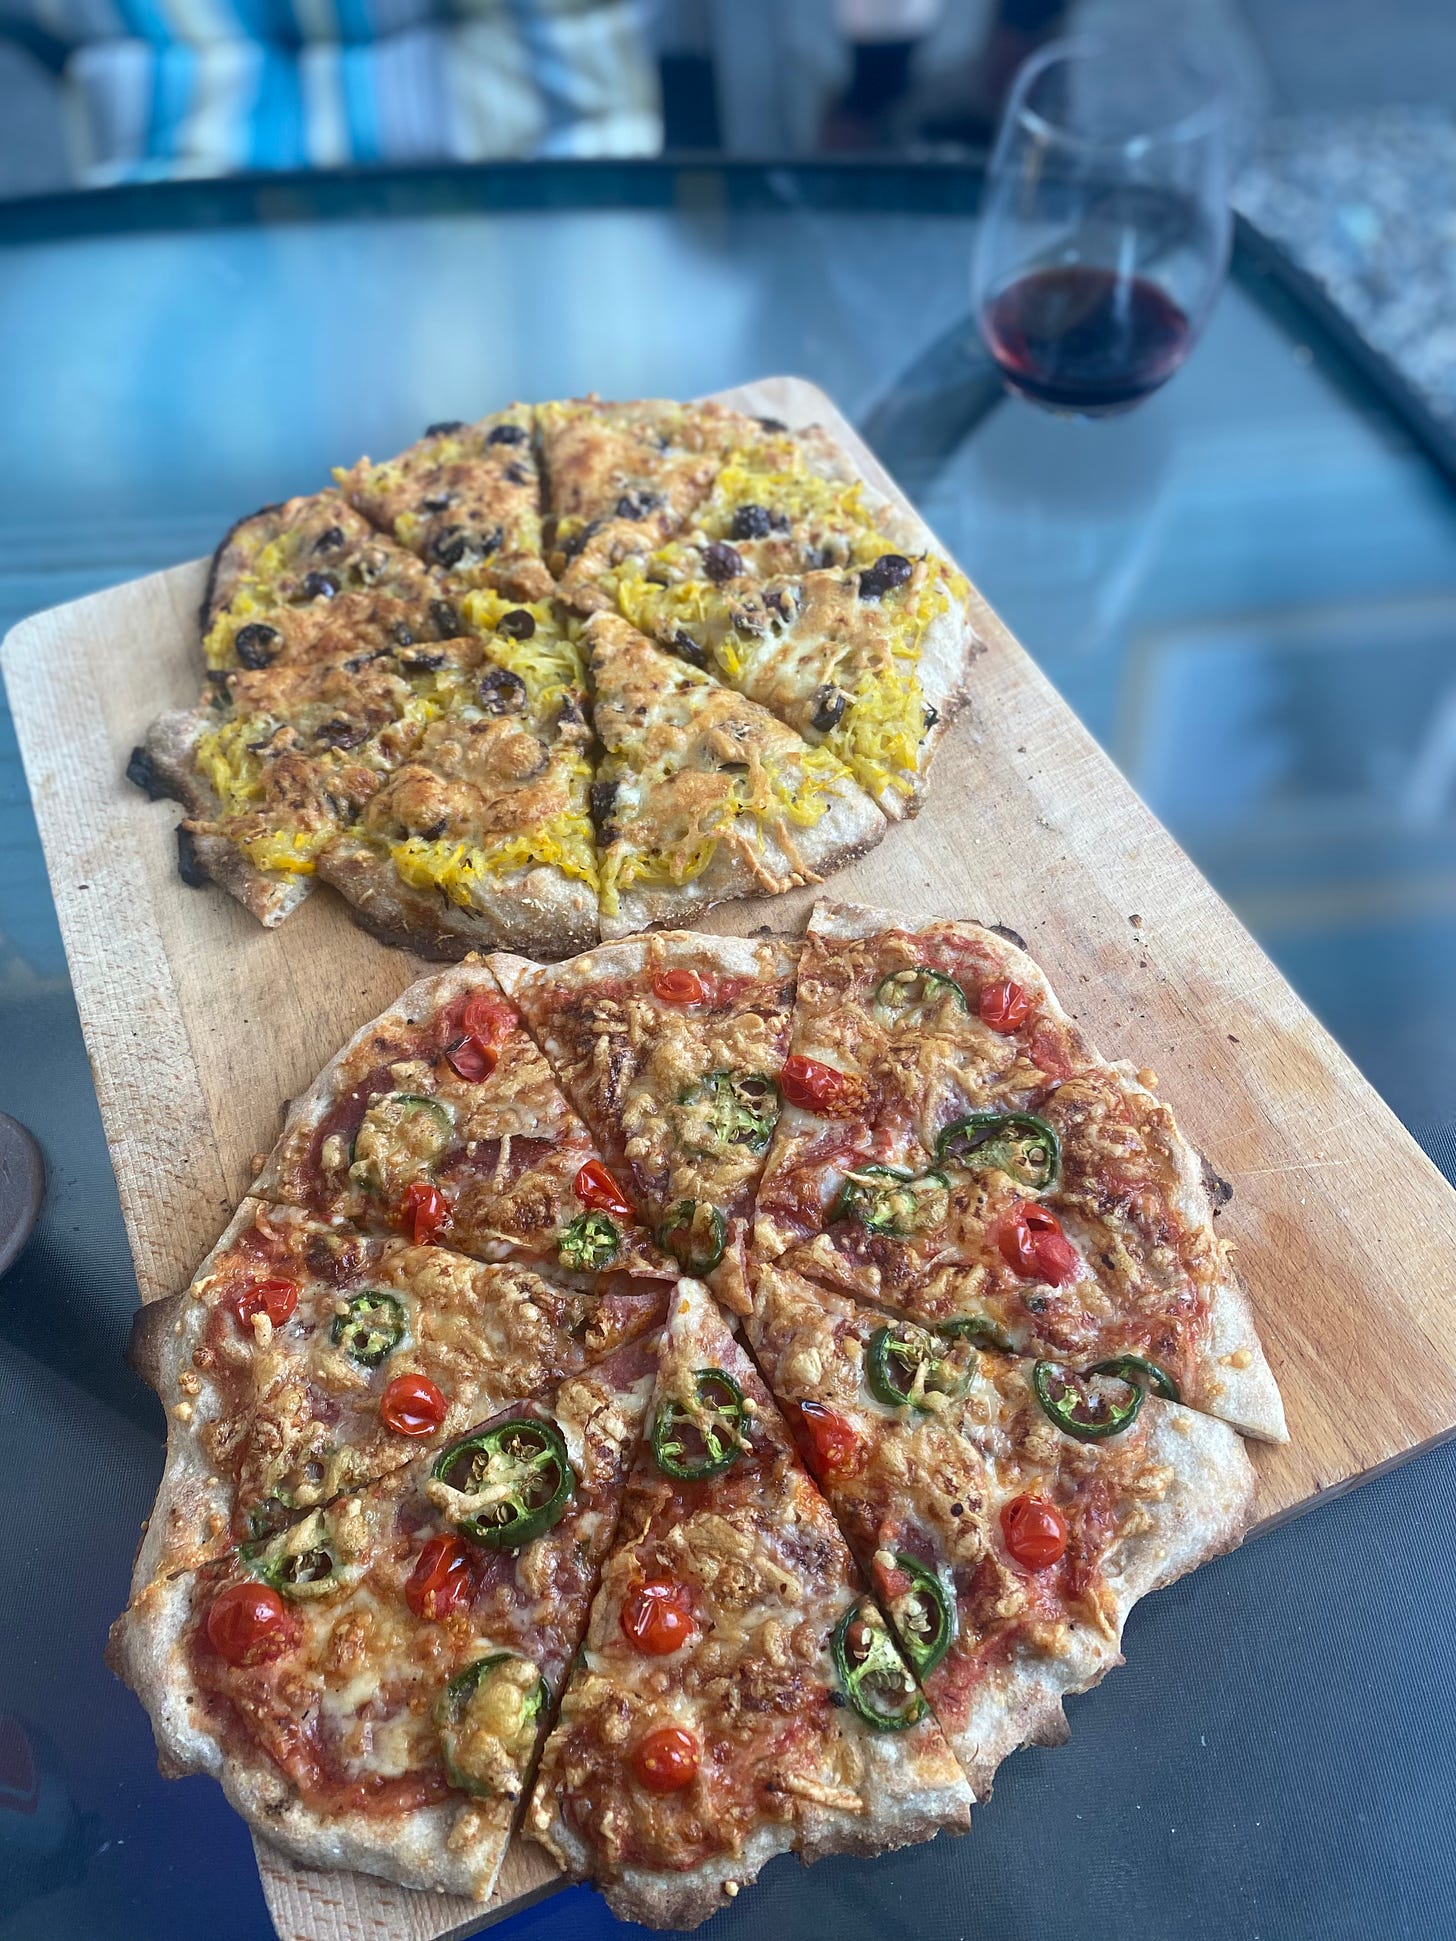 On a wooden cutting board, the two pizzas described above, the salami pizza in the foreground and the zucchini pizza in the background. A stemless glass of red wine is on the table behind them.